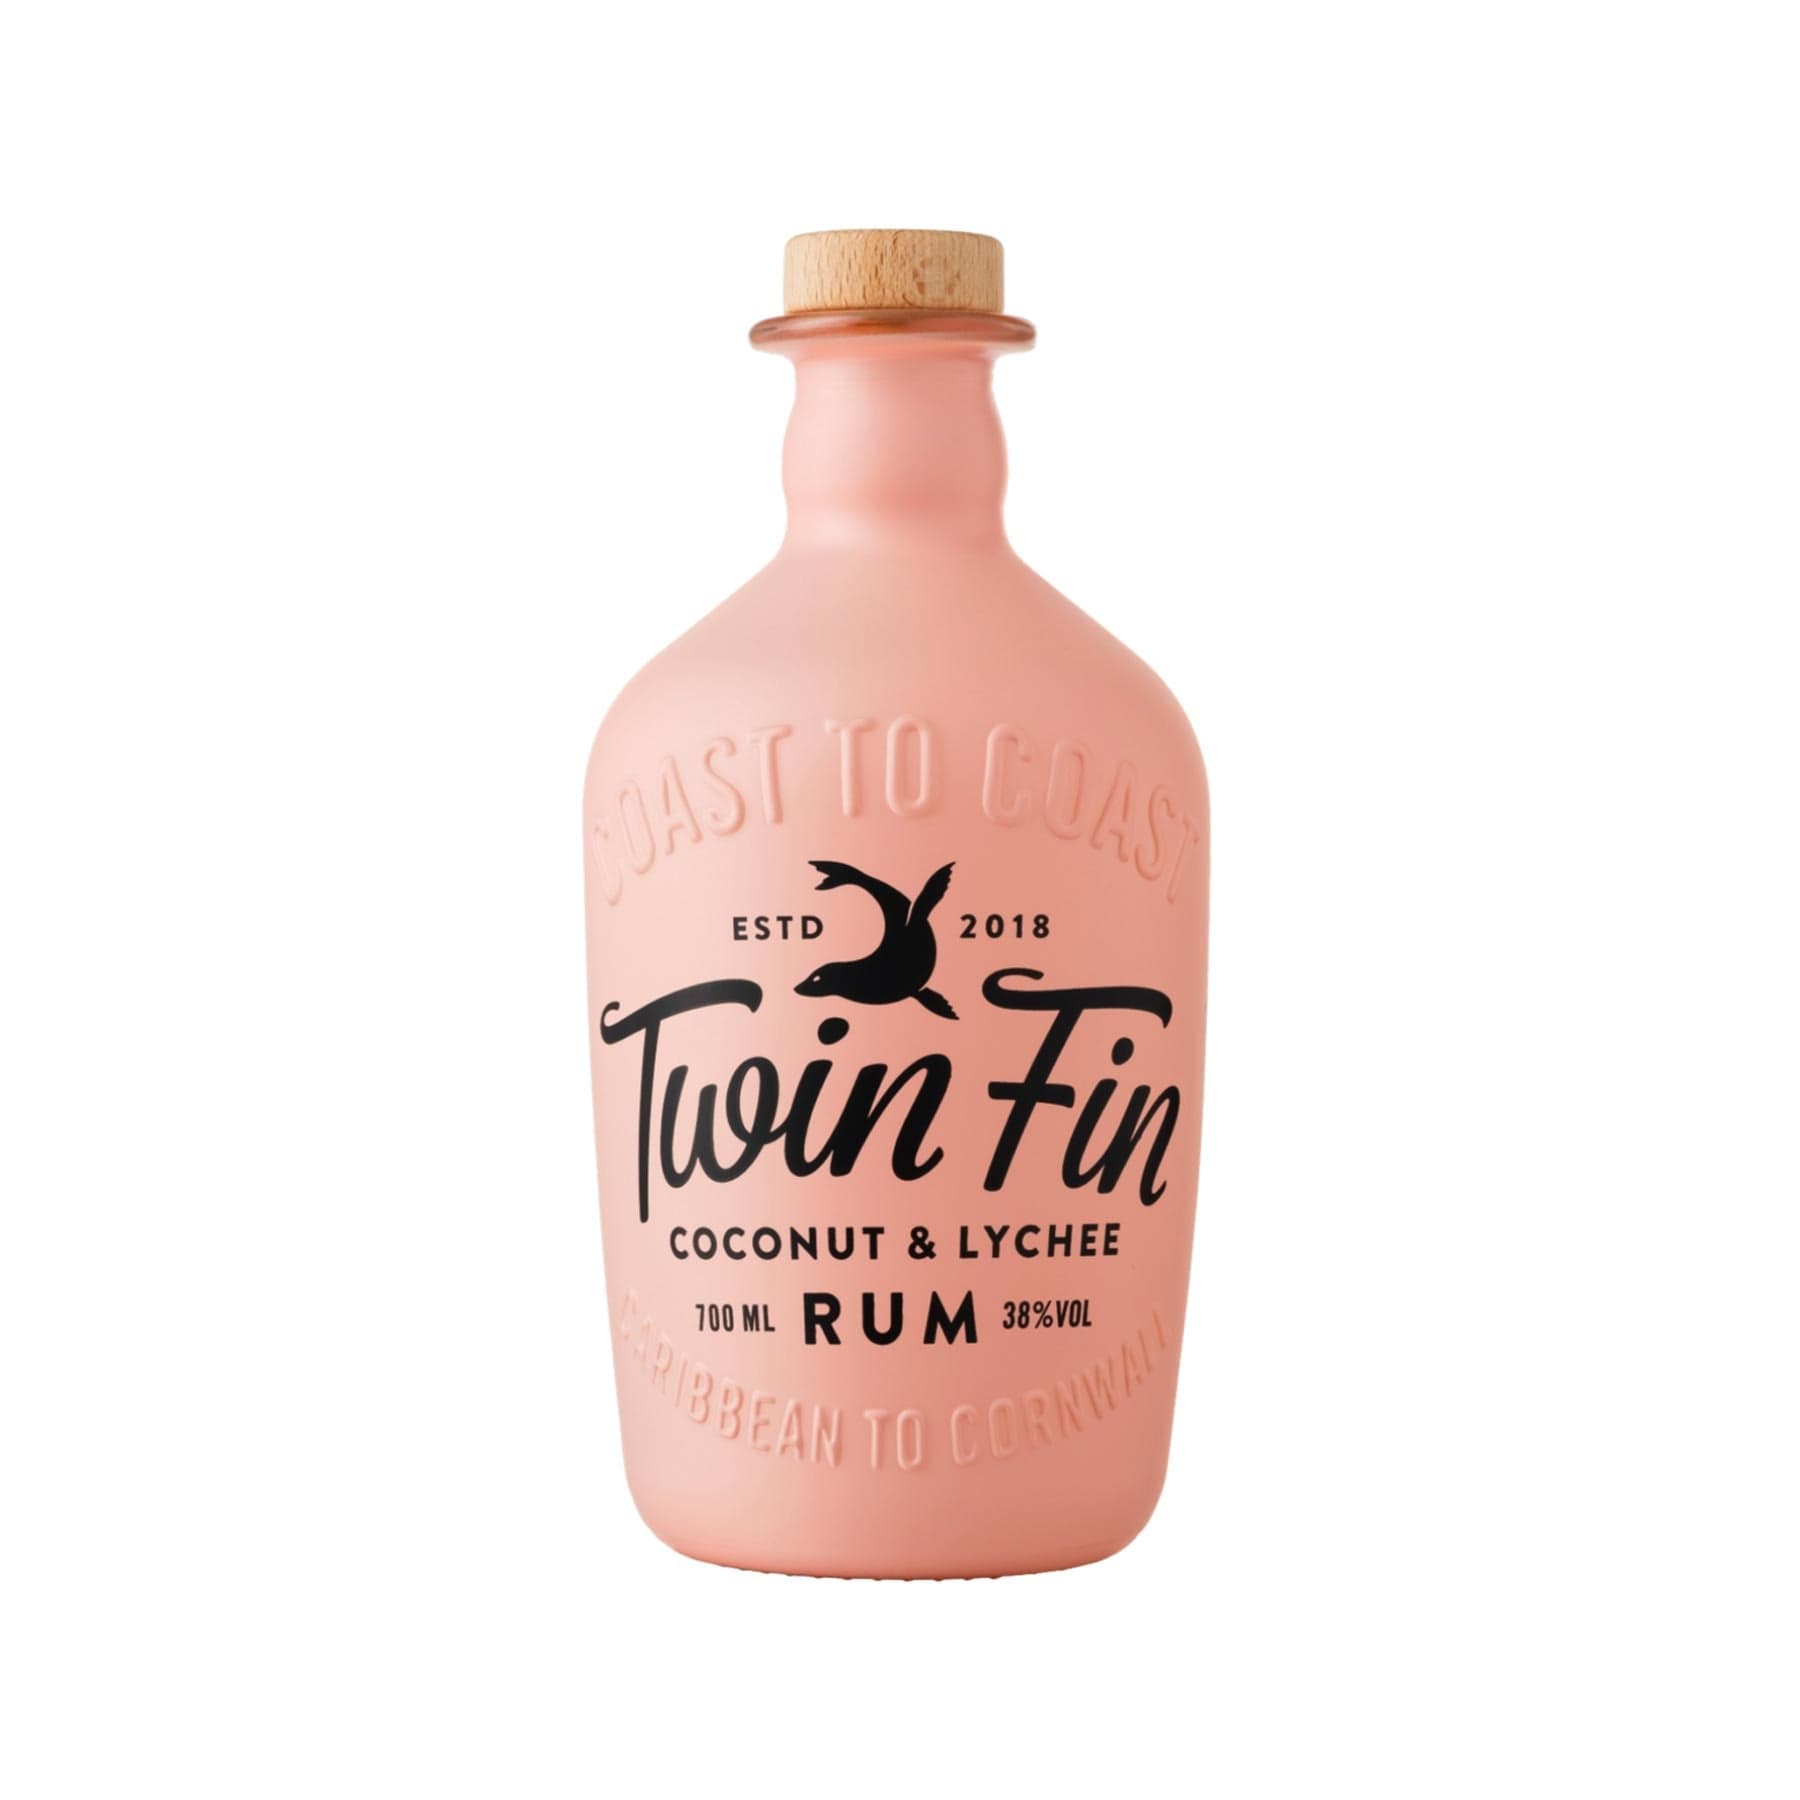 Coconut & lychee rum 70cl